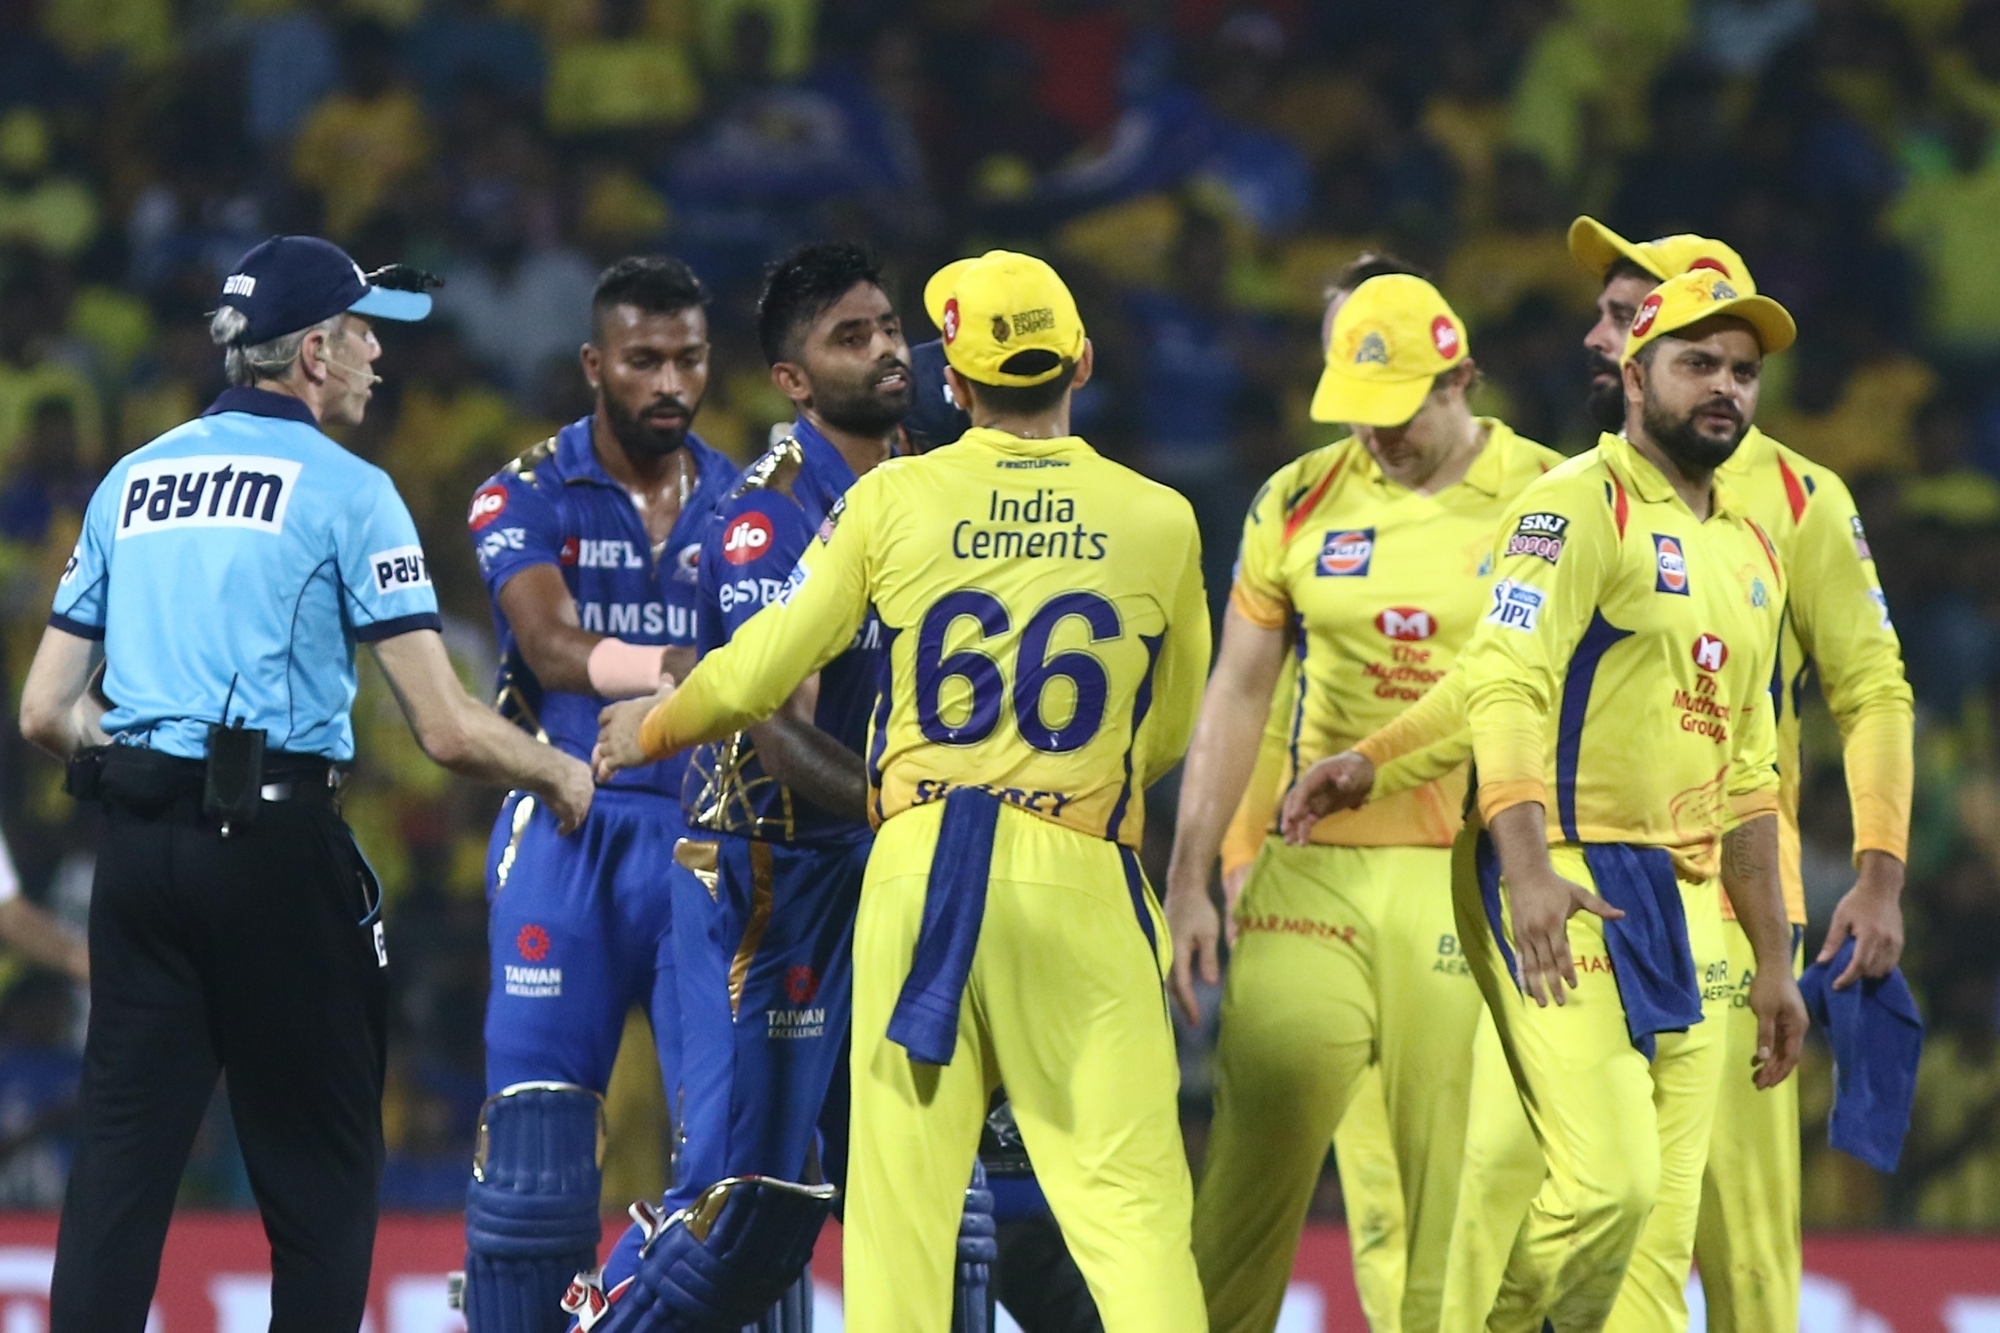 IPL 2020 was initially slated to start on March 29 | Getty